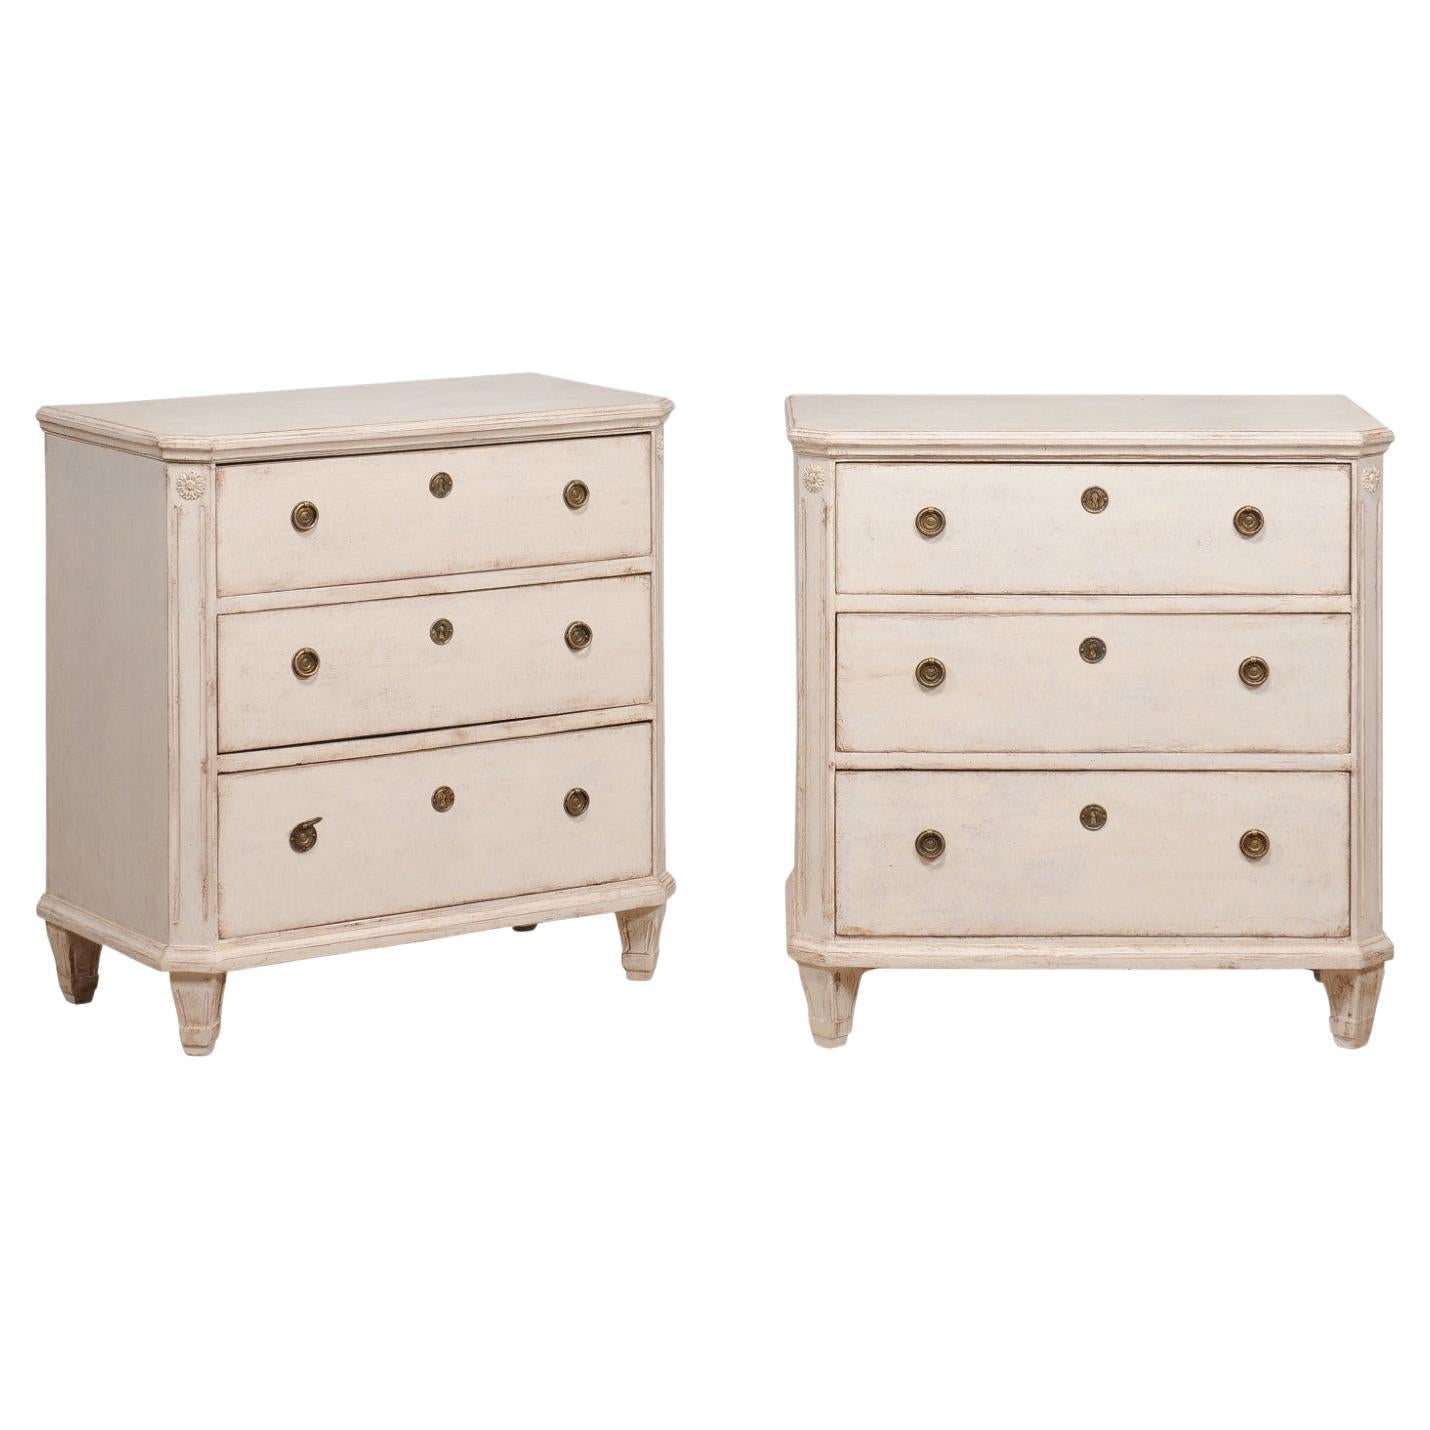 19th Century Swedish Gustavian Style Painted Three-Drawer Chests, a Pair